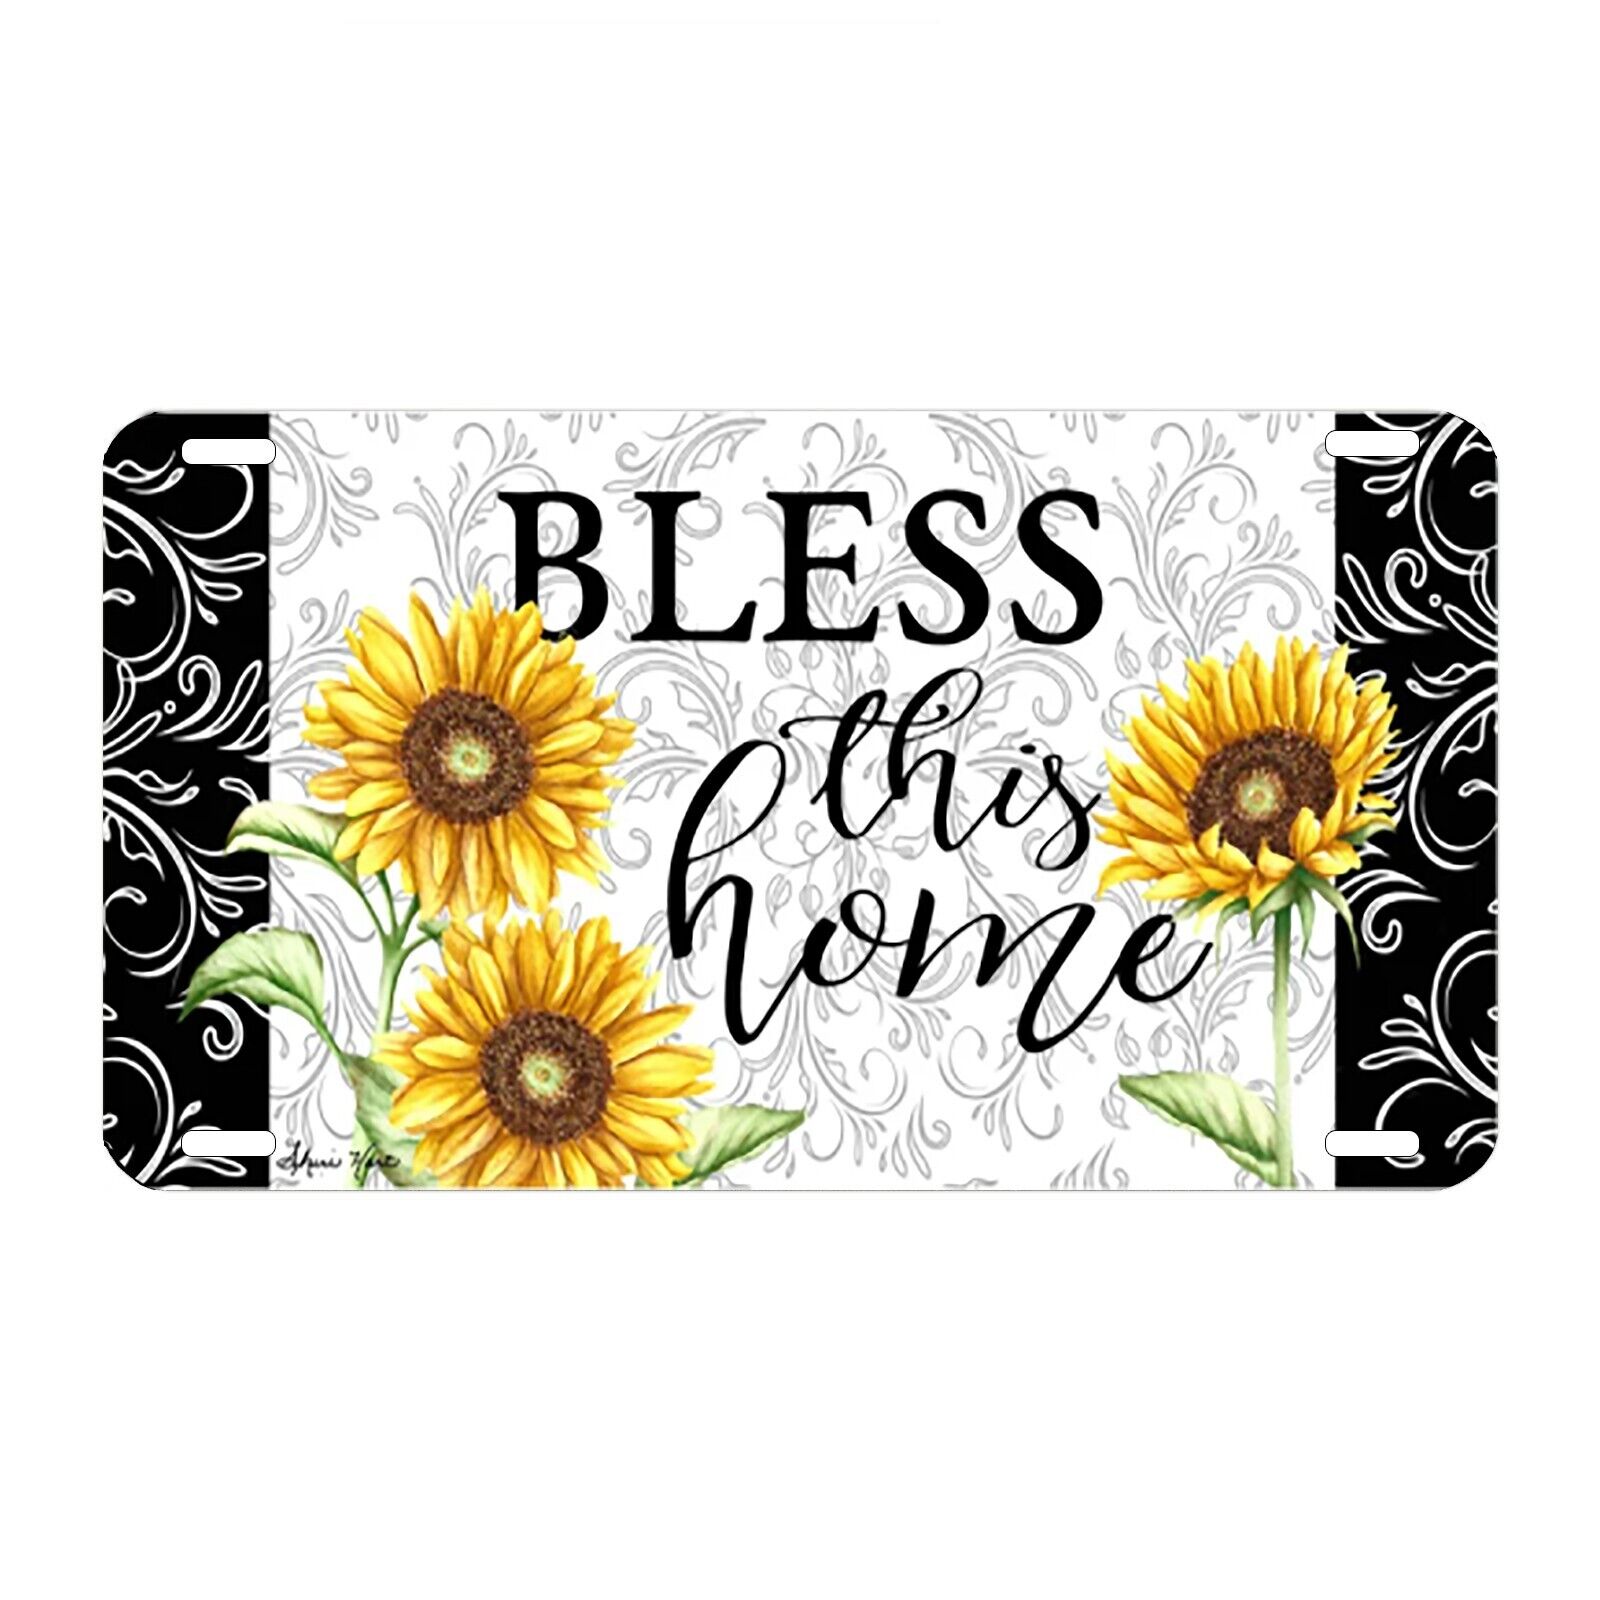 God Bless This Home License Plate Home Wall Decor Novelty Aluminum Metal Sign